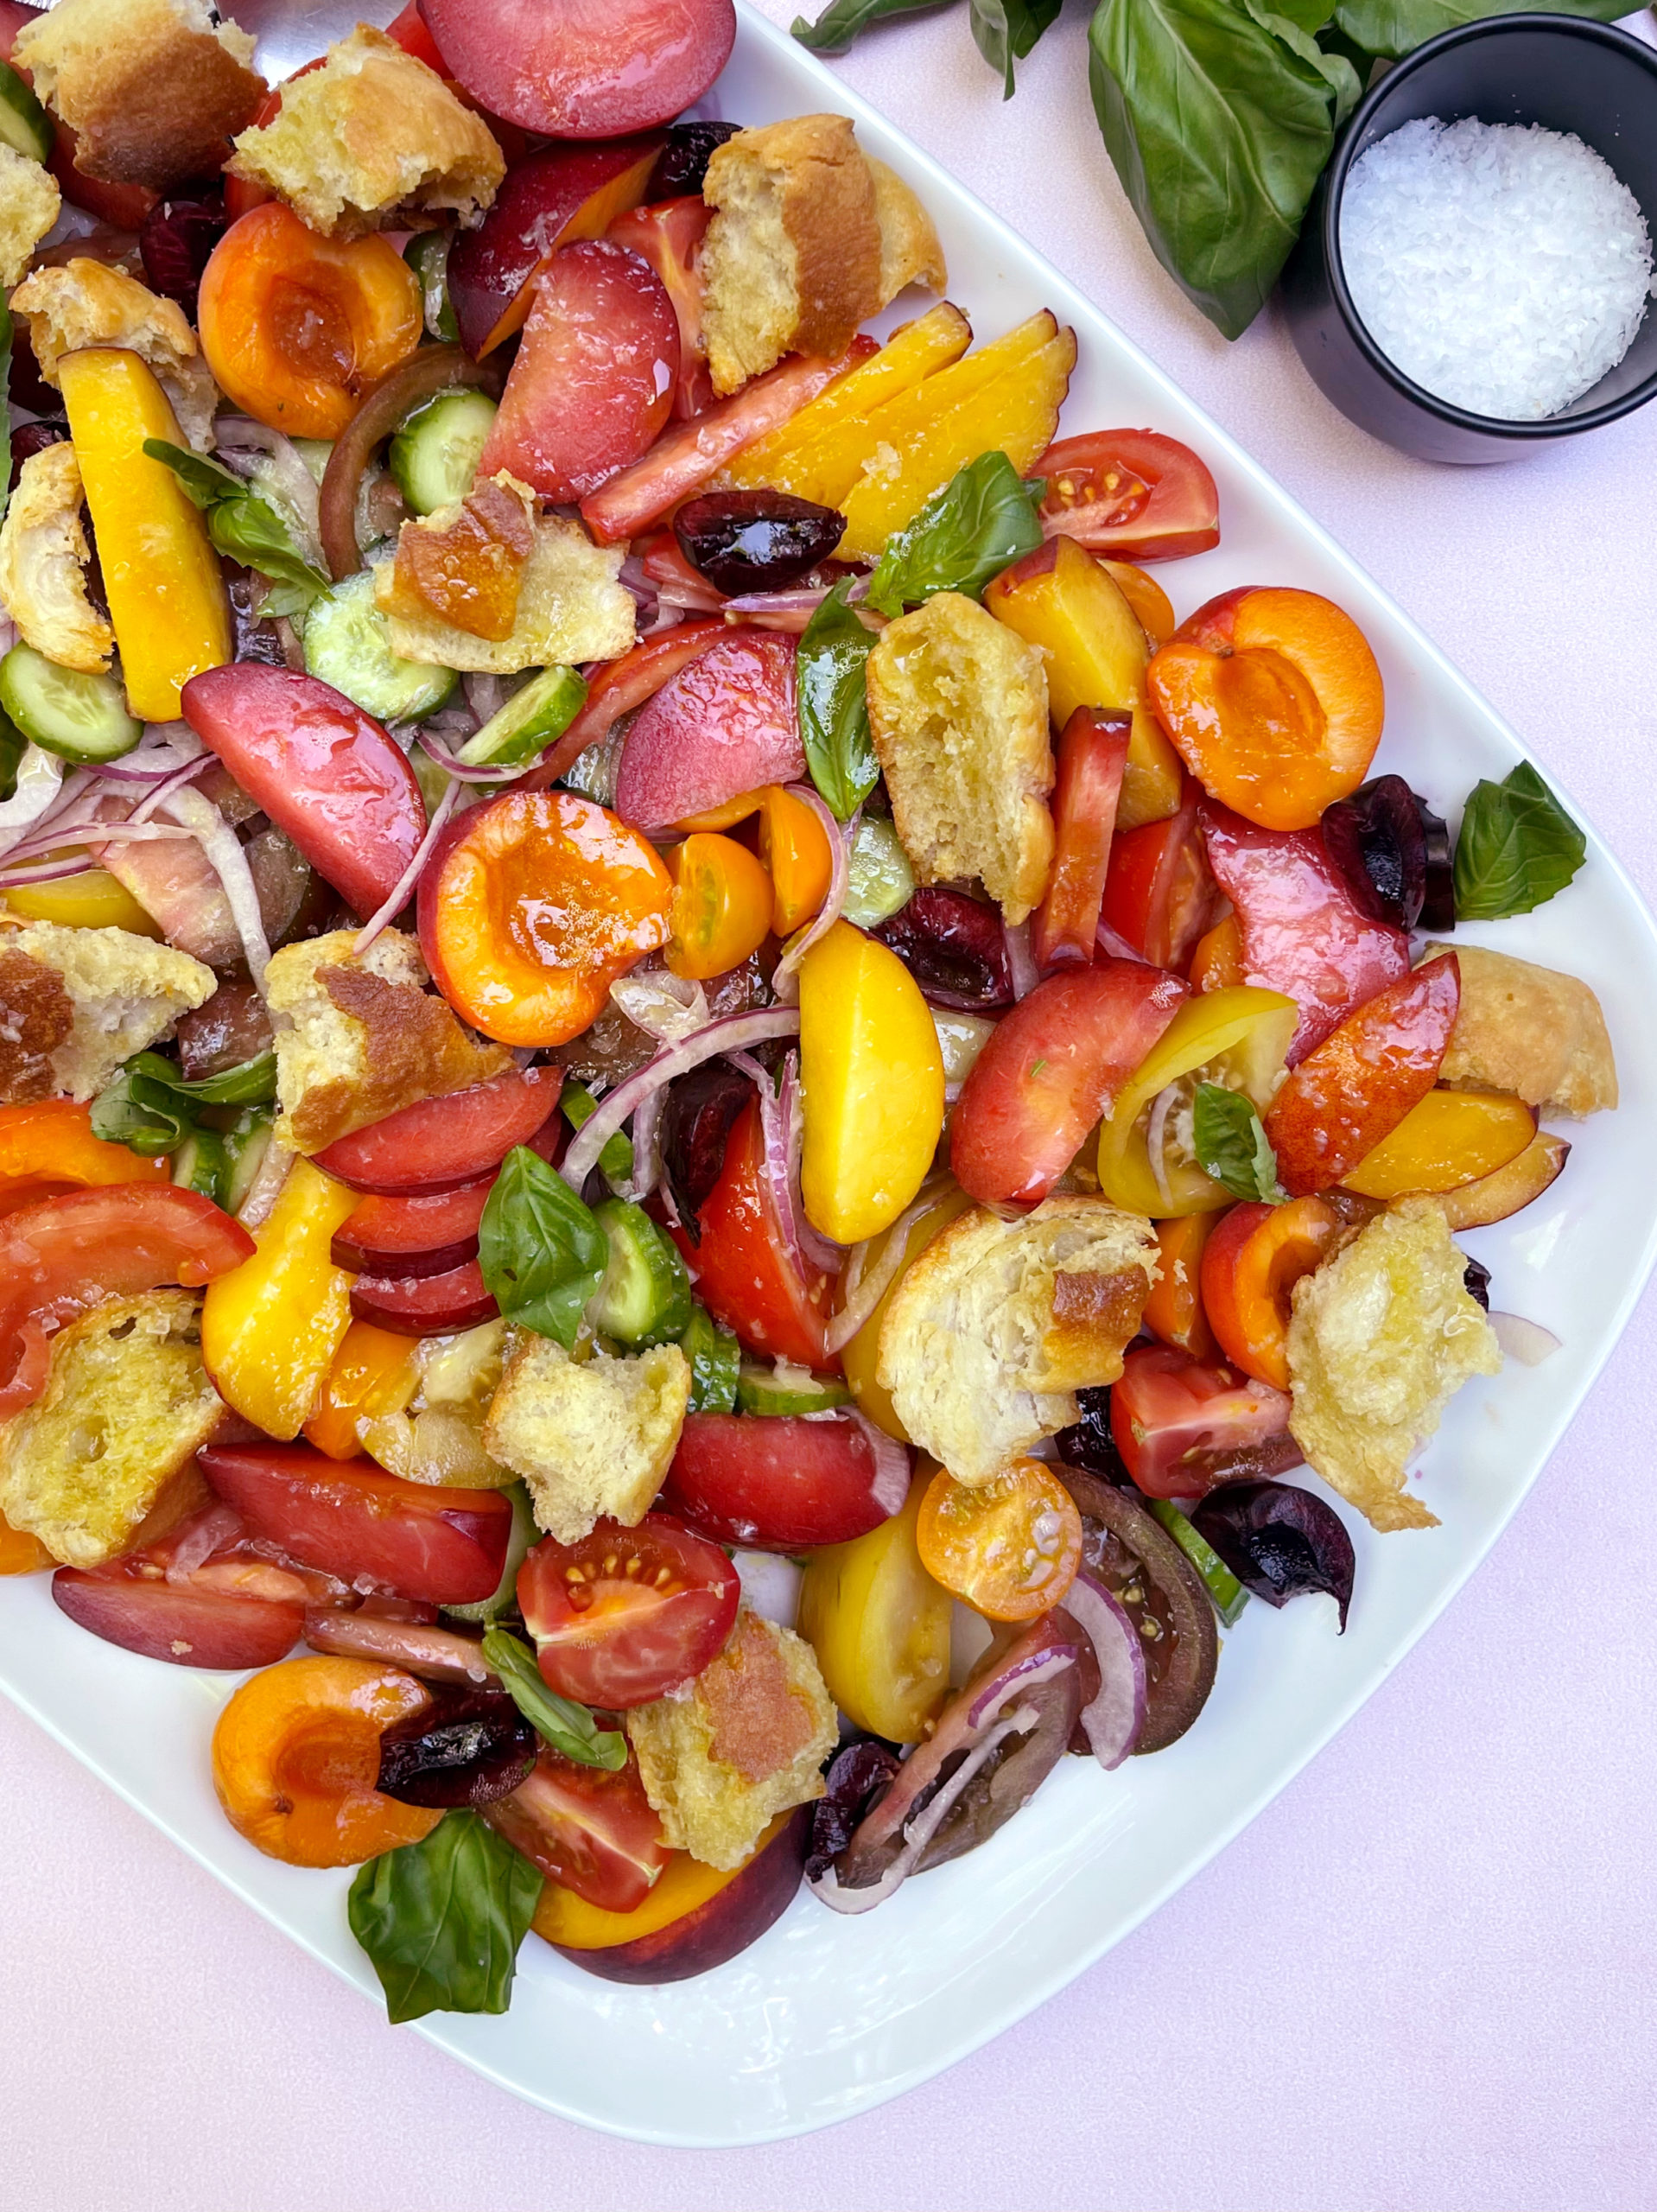 Stone Fruit Panzanella Salad recipe: The perfect summer version of a classic Panzanella salad | Didn't I Just Feed You podcast